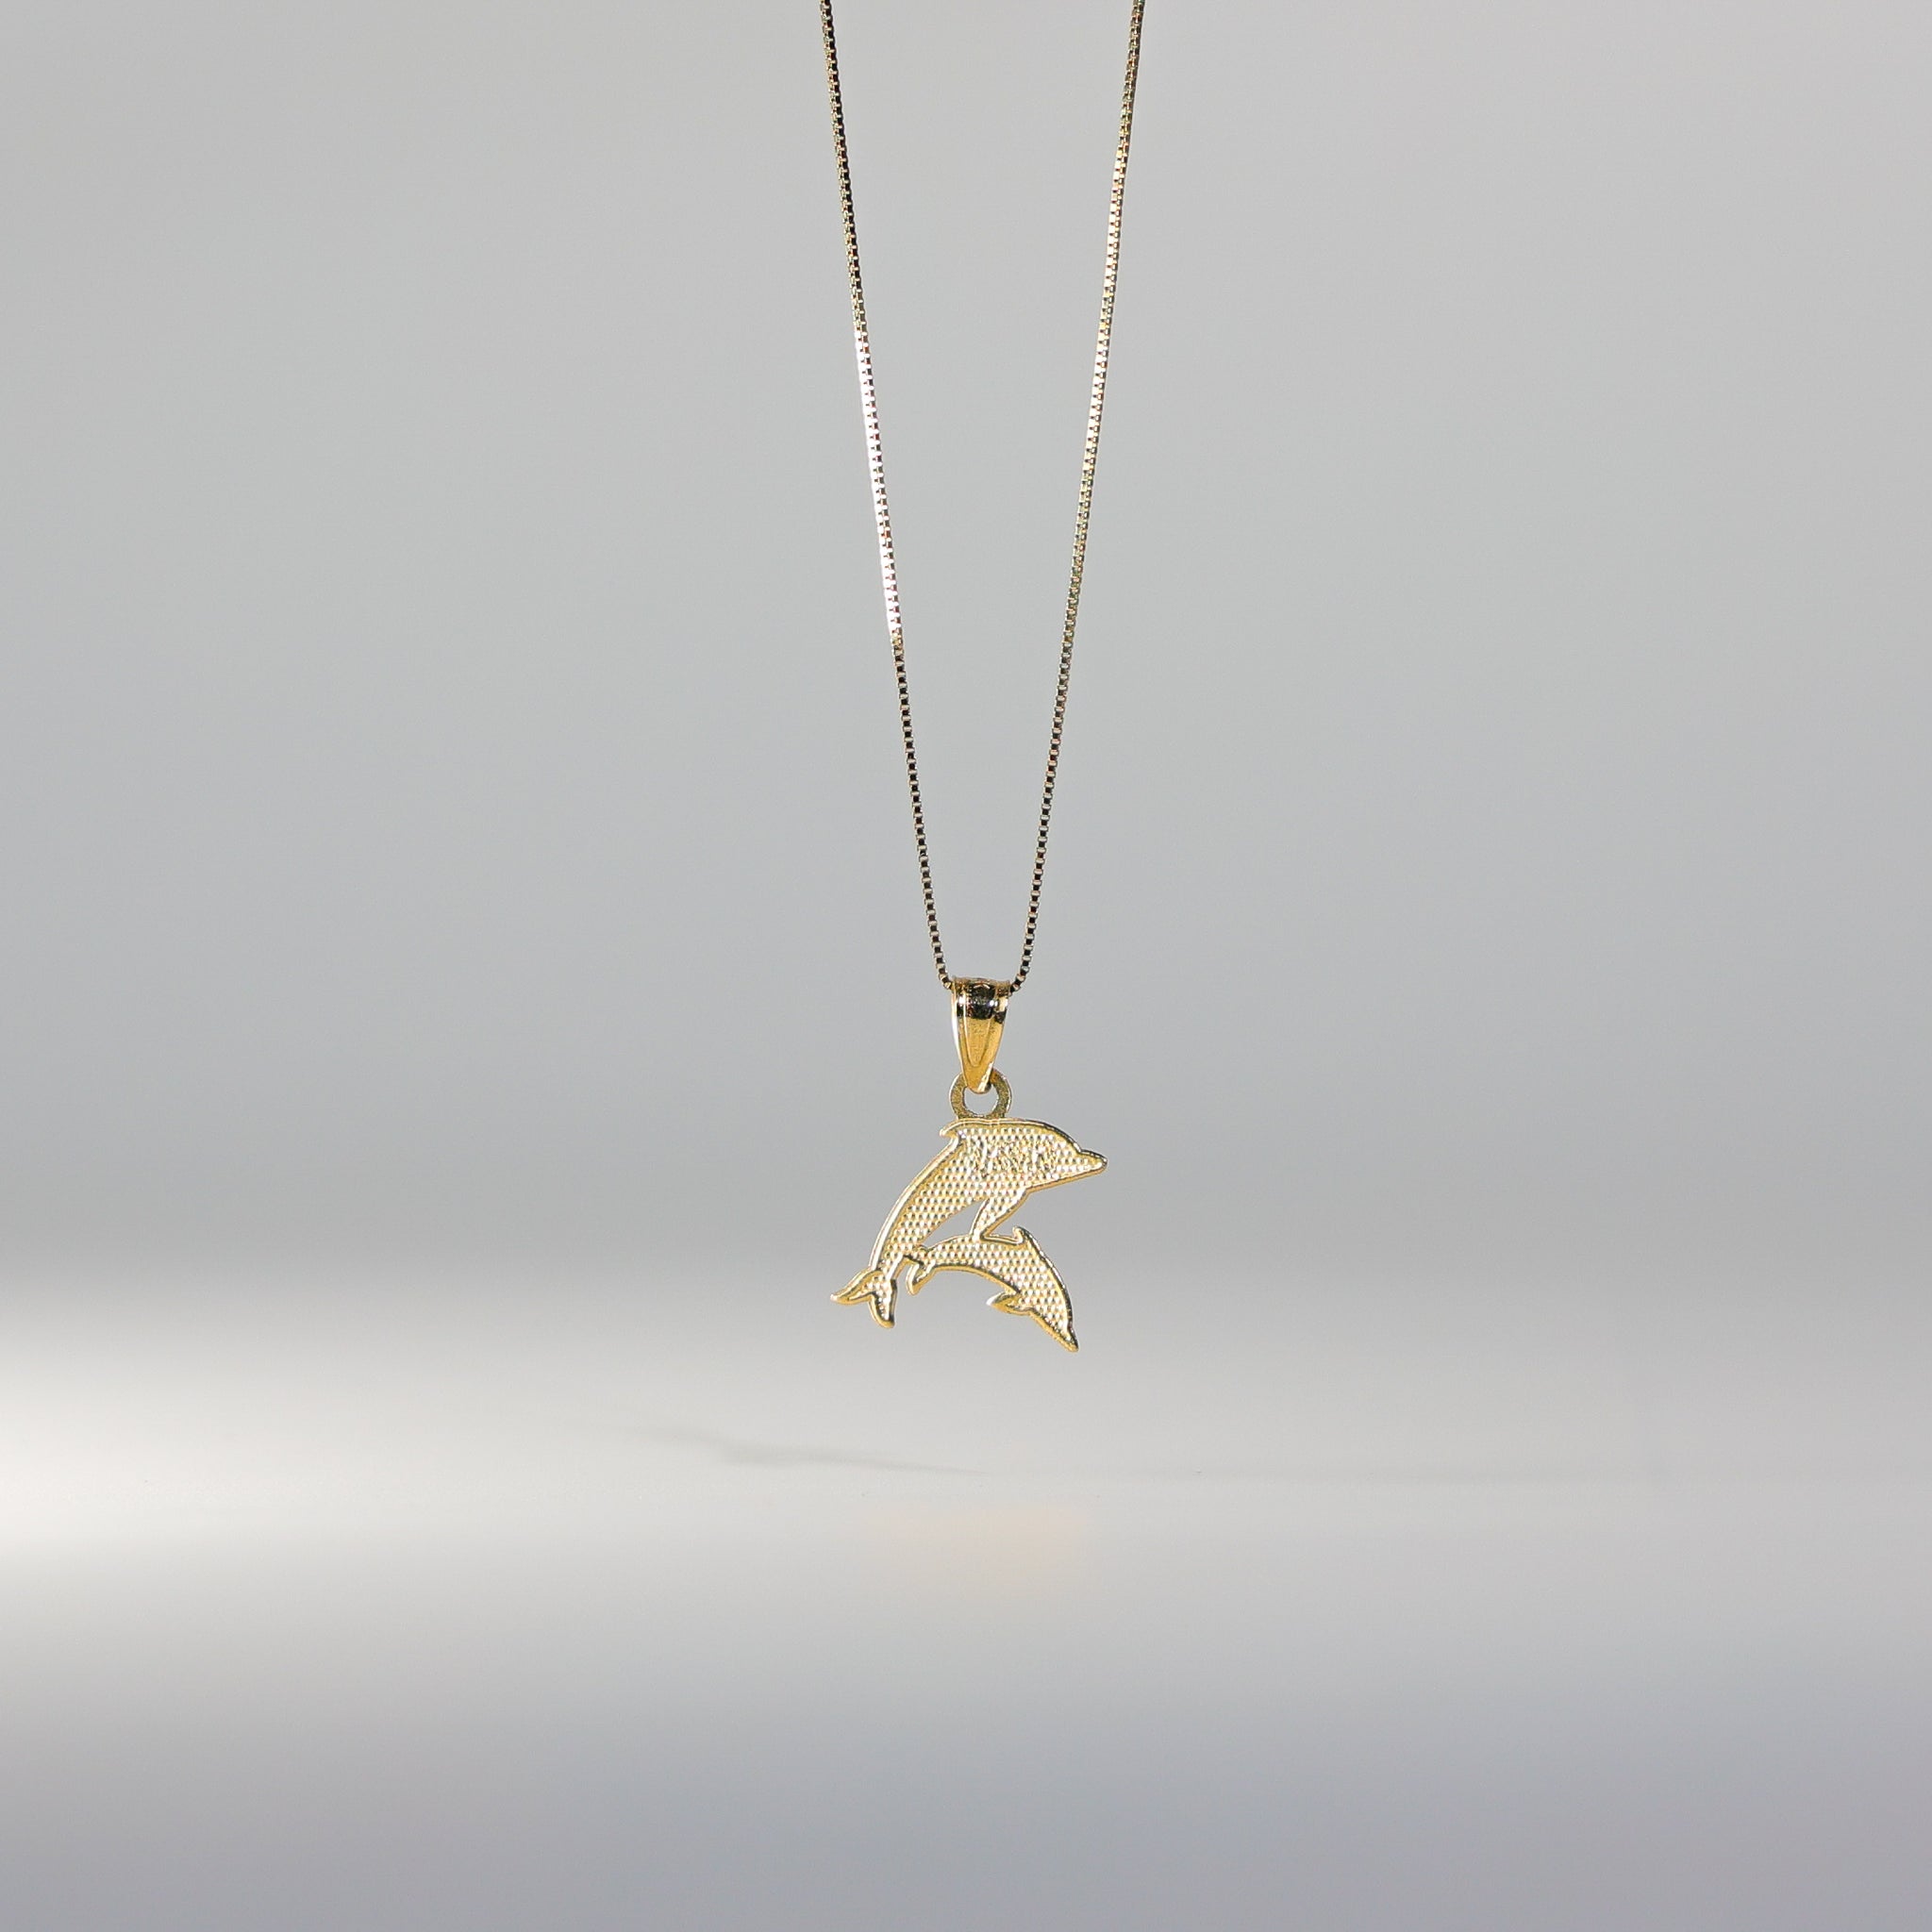 Gold Douple Dolphin Pendant Model-1675 - Charlie & Co. Jewelry